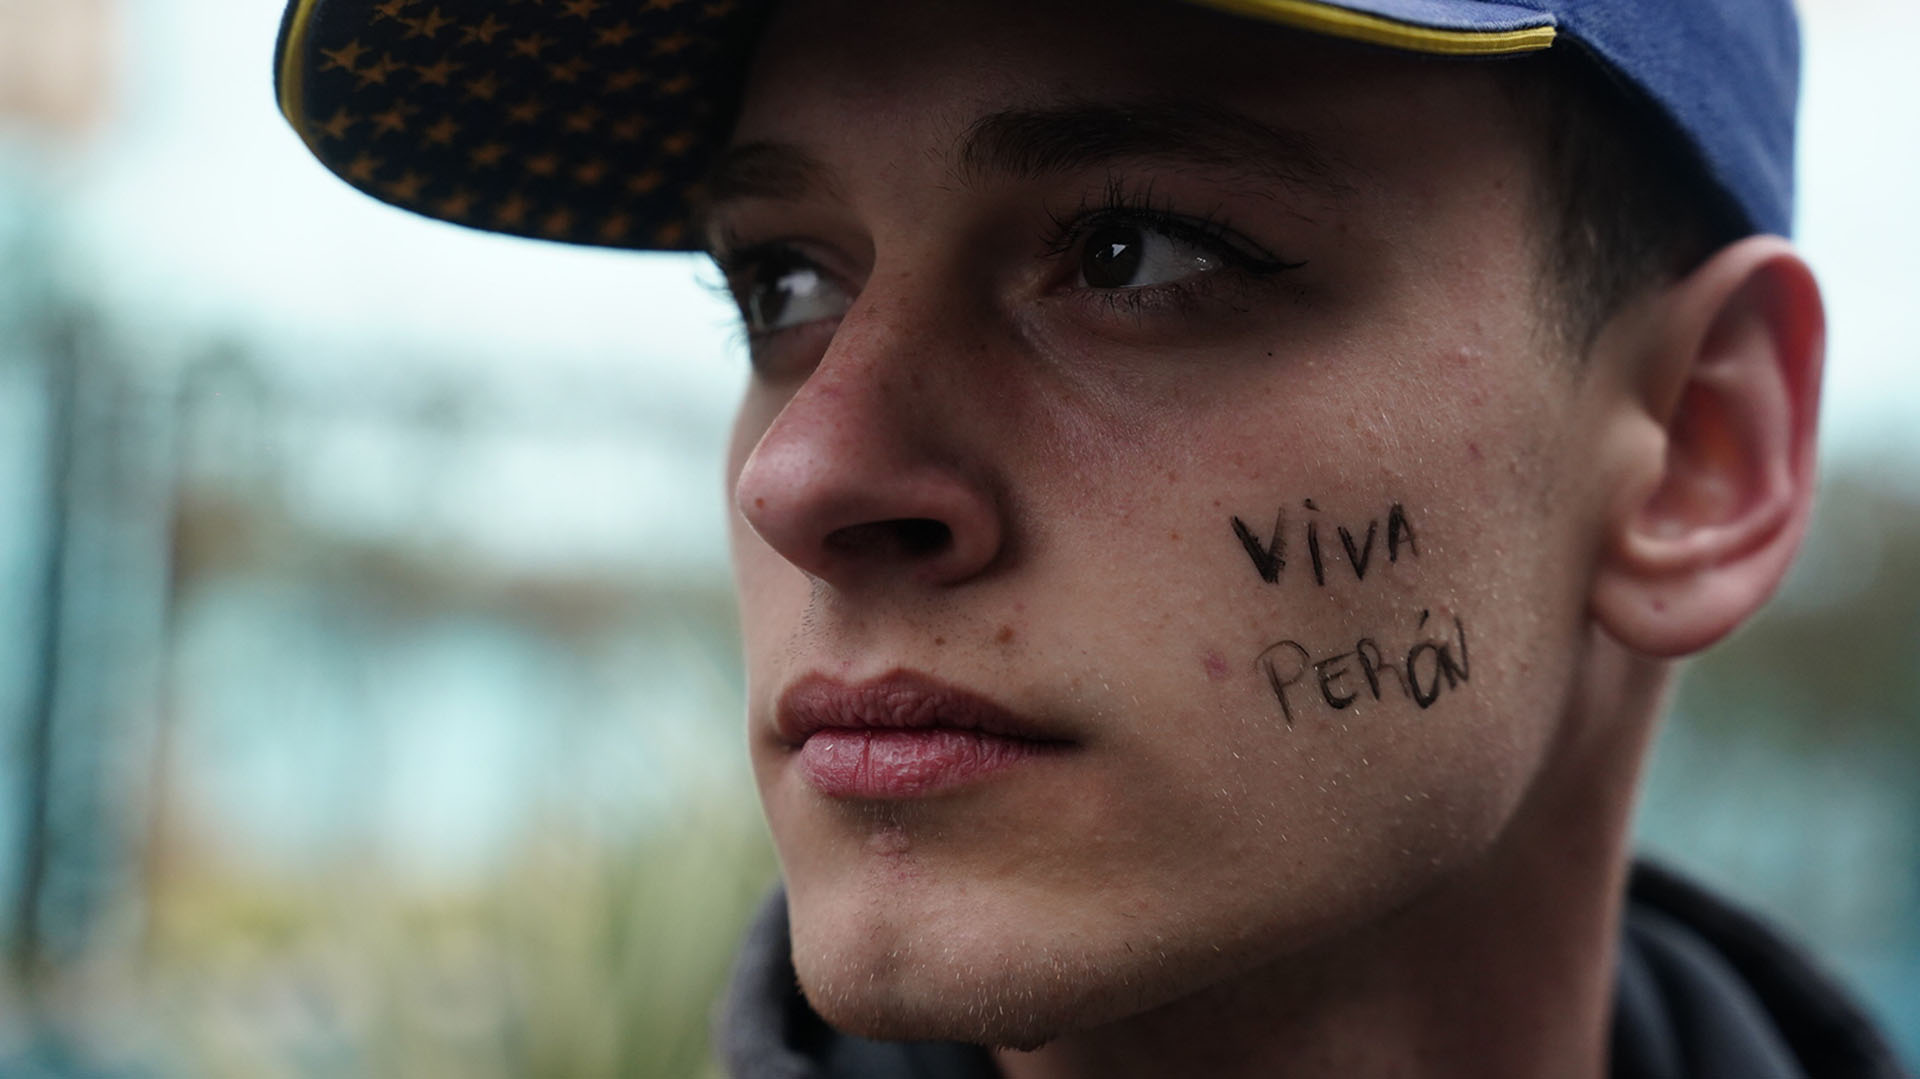 "Long live Peron"said the provisional tattoo of a young man who participated in the march